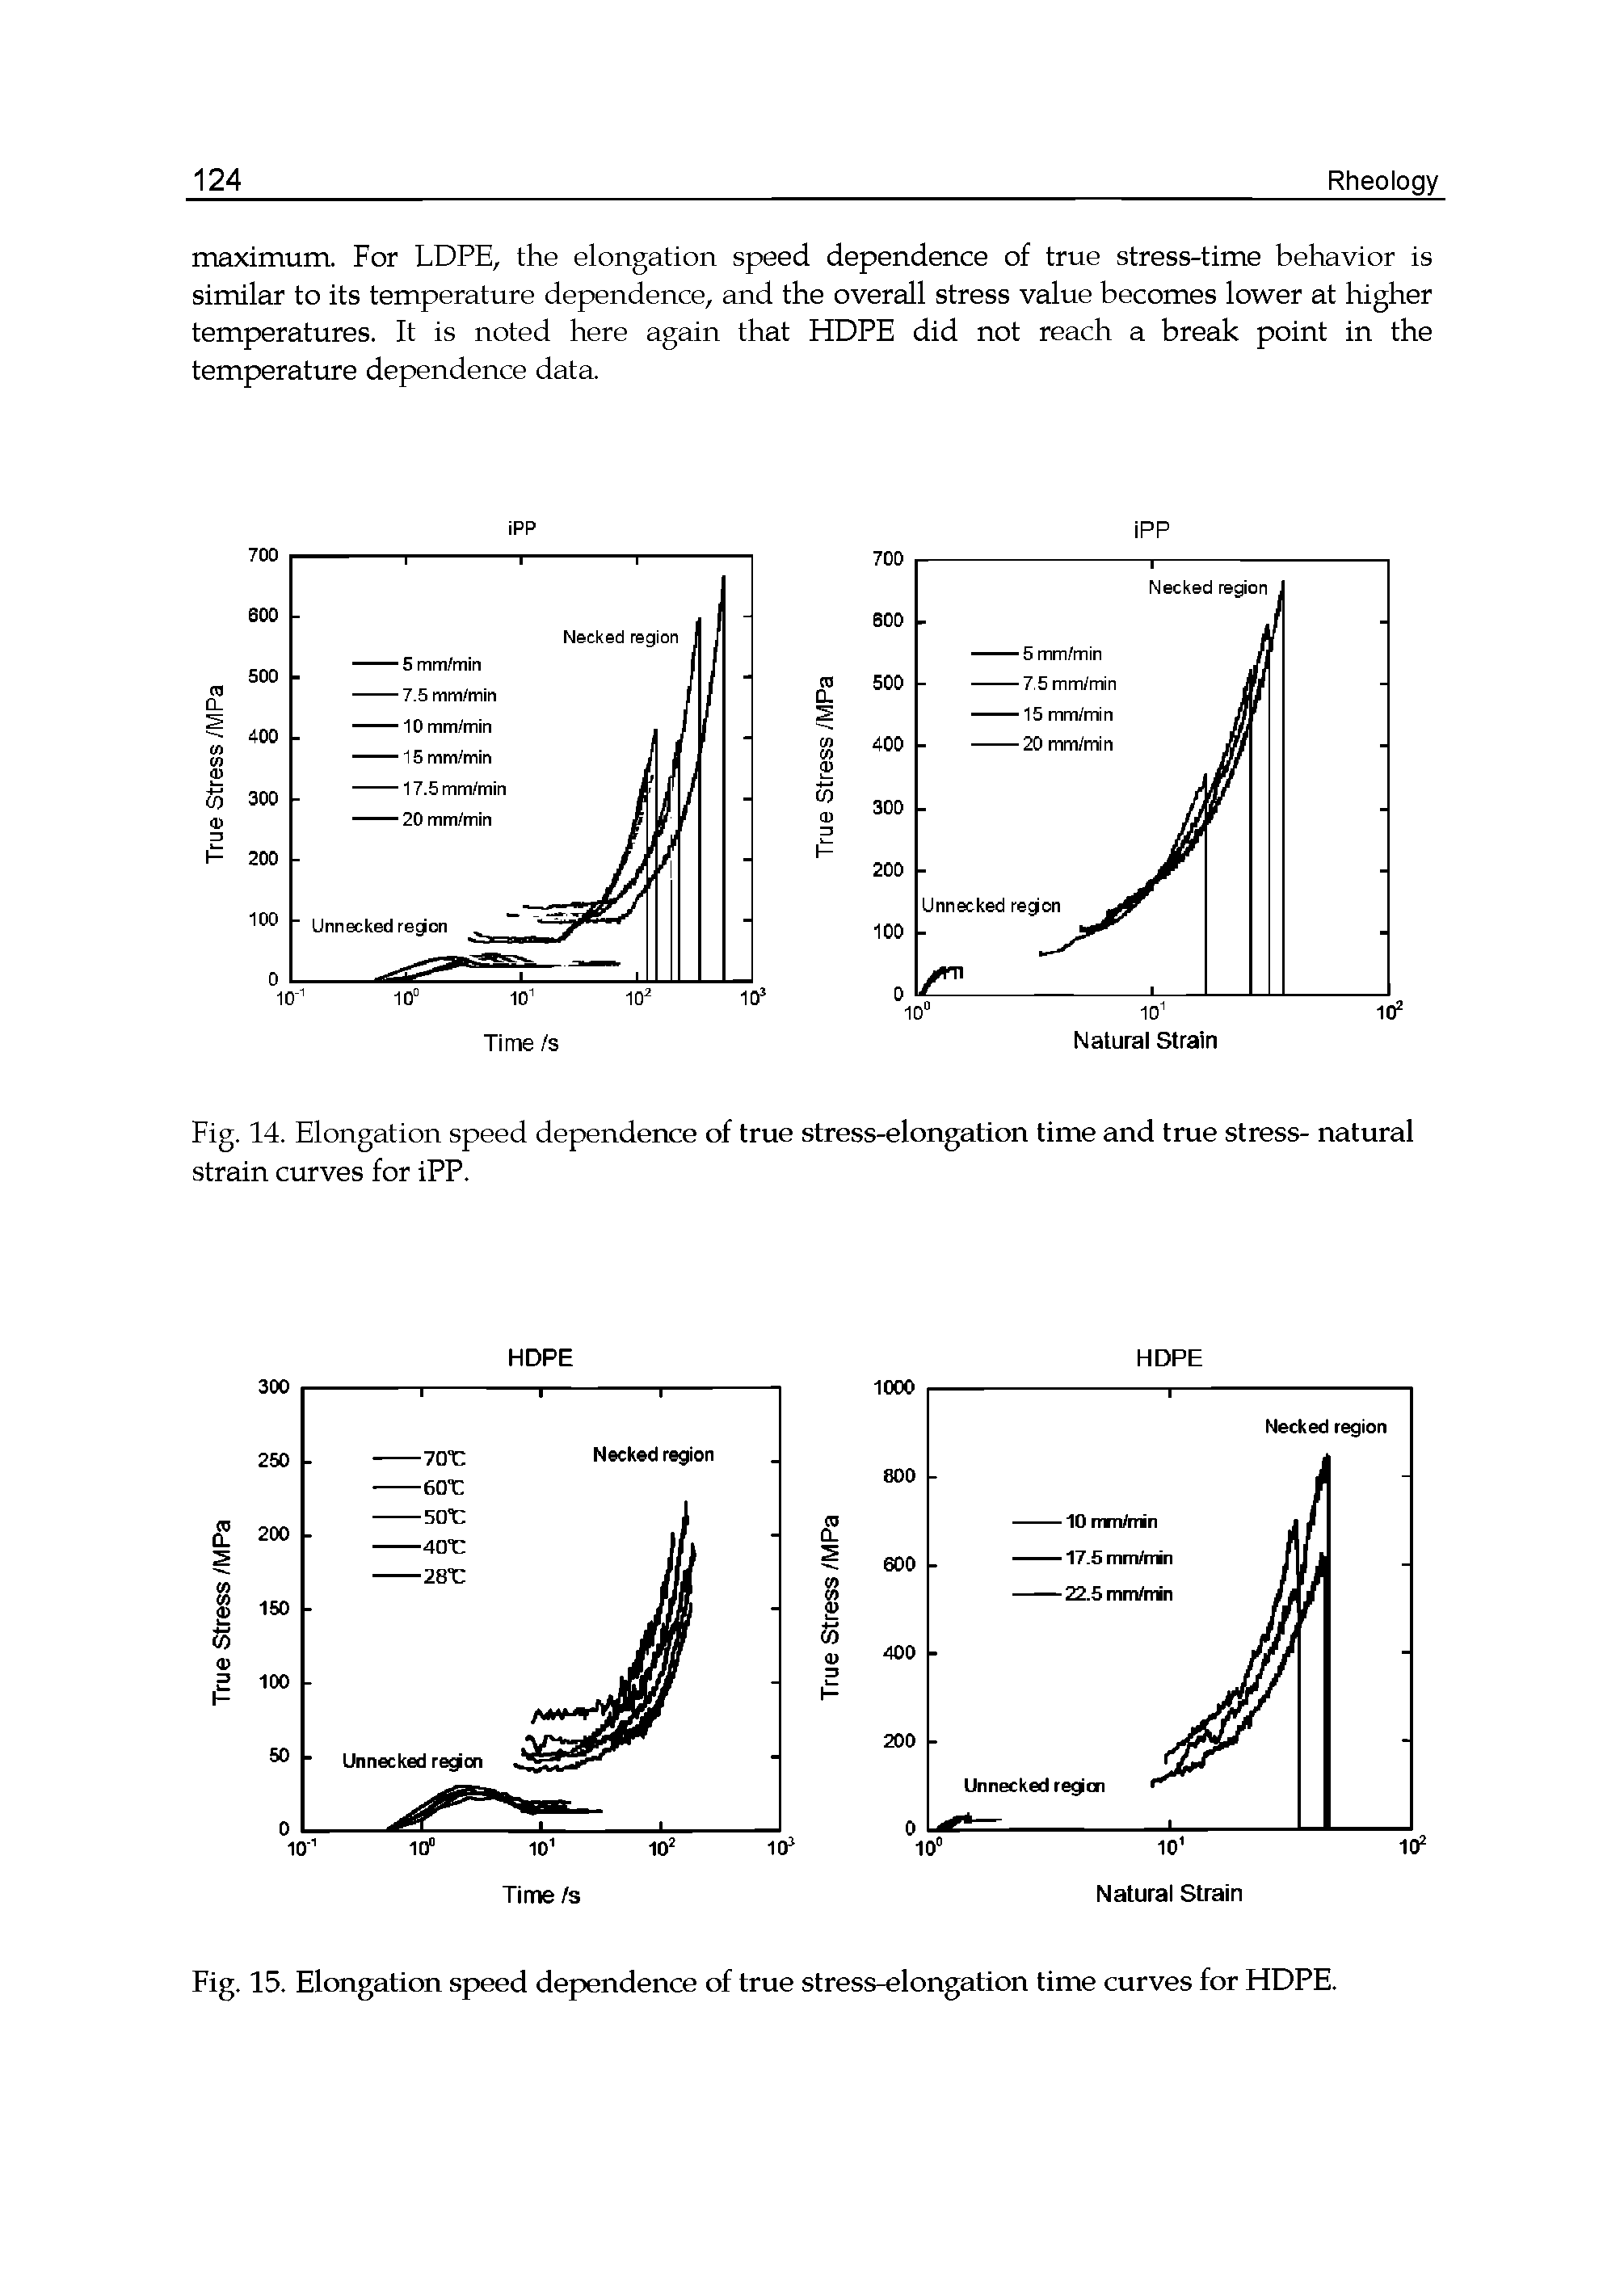 Fig. 14. Elongation speed dependence of true stress-elongation time and true stress- natural strain curves for iPP.